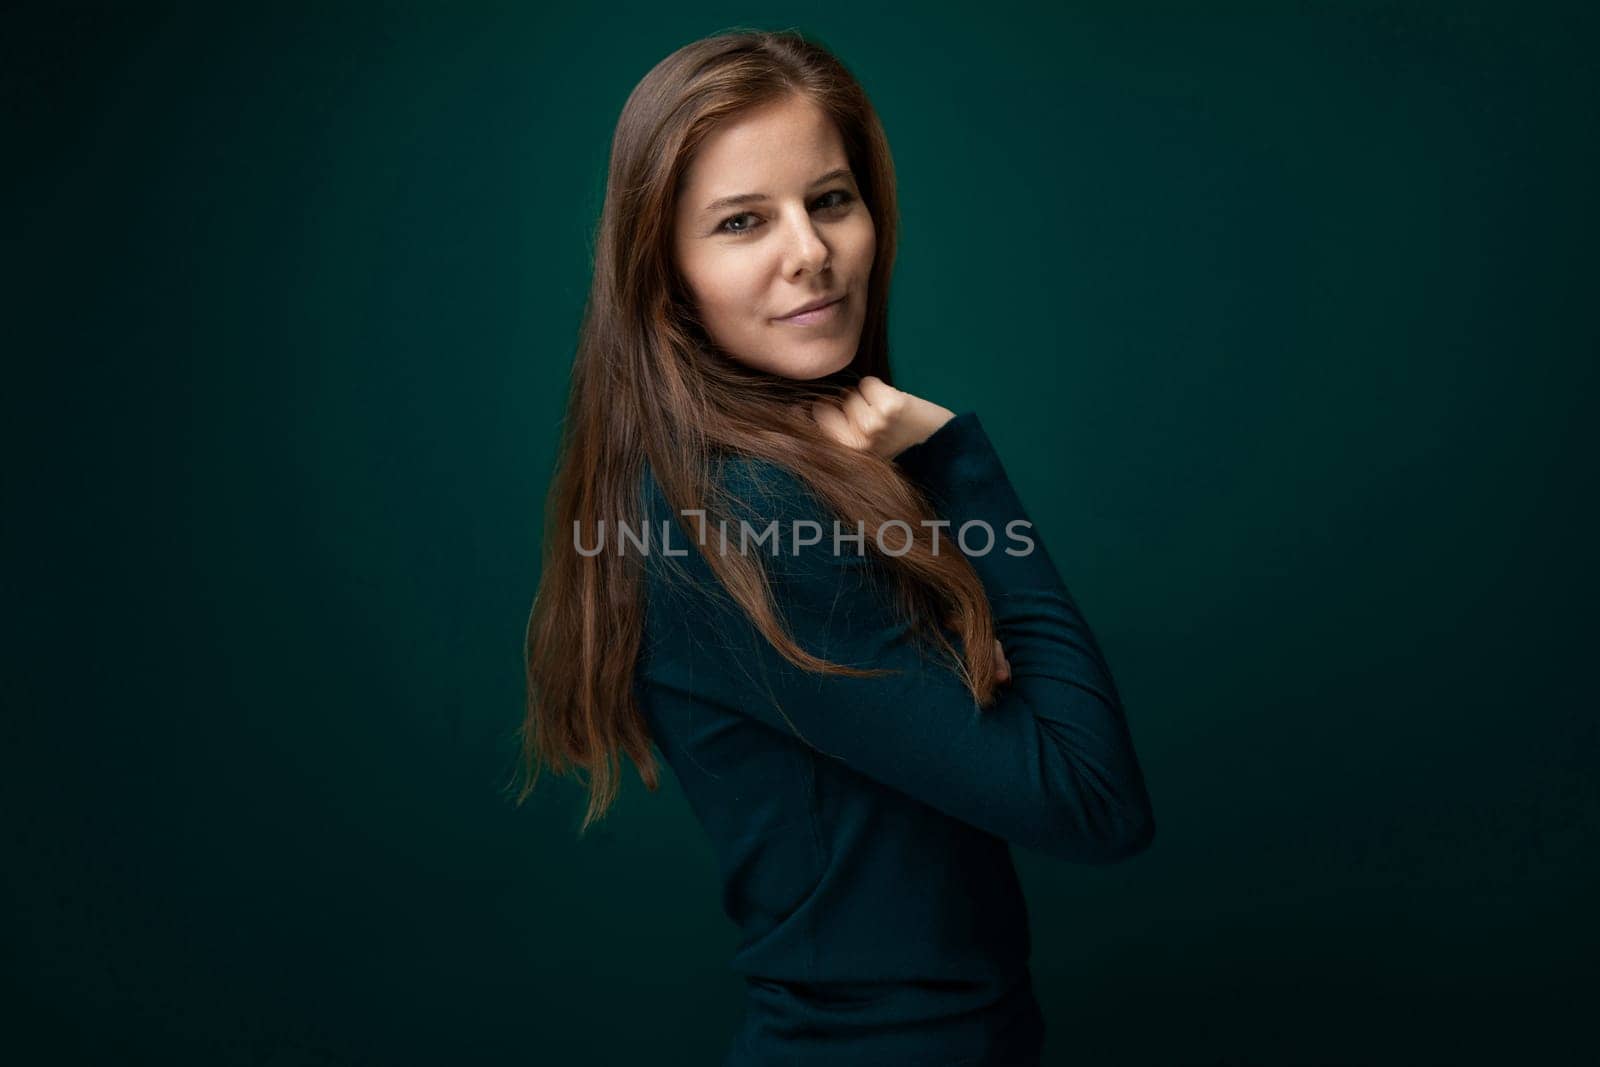 Caucasian young woman wearing a green turtleneck on a dark background with copy space.